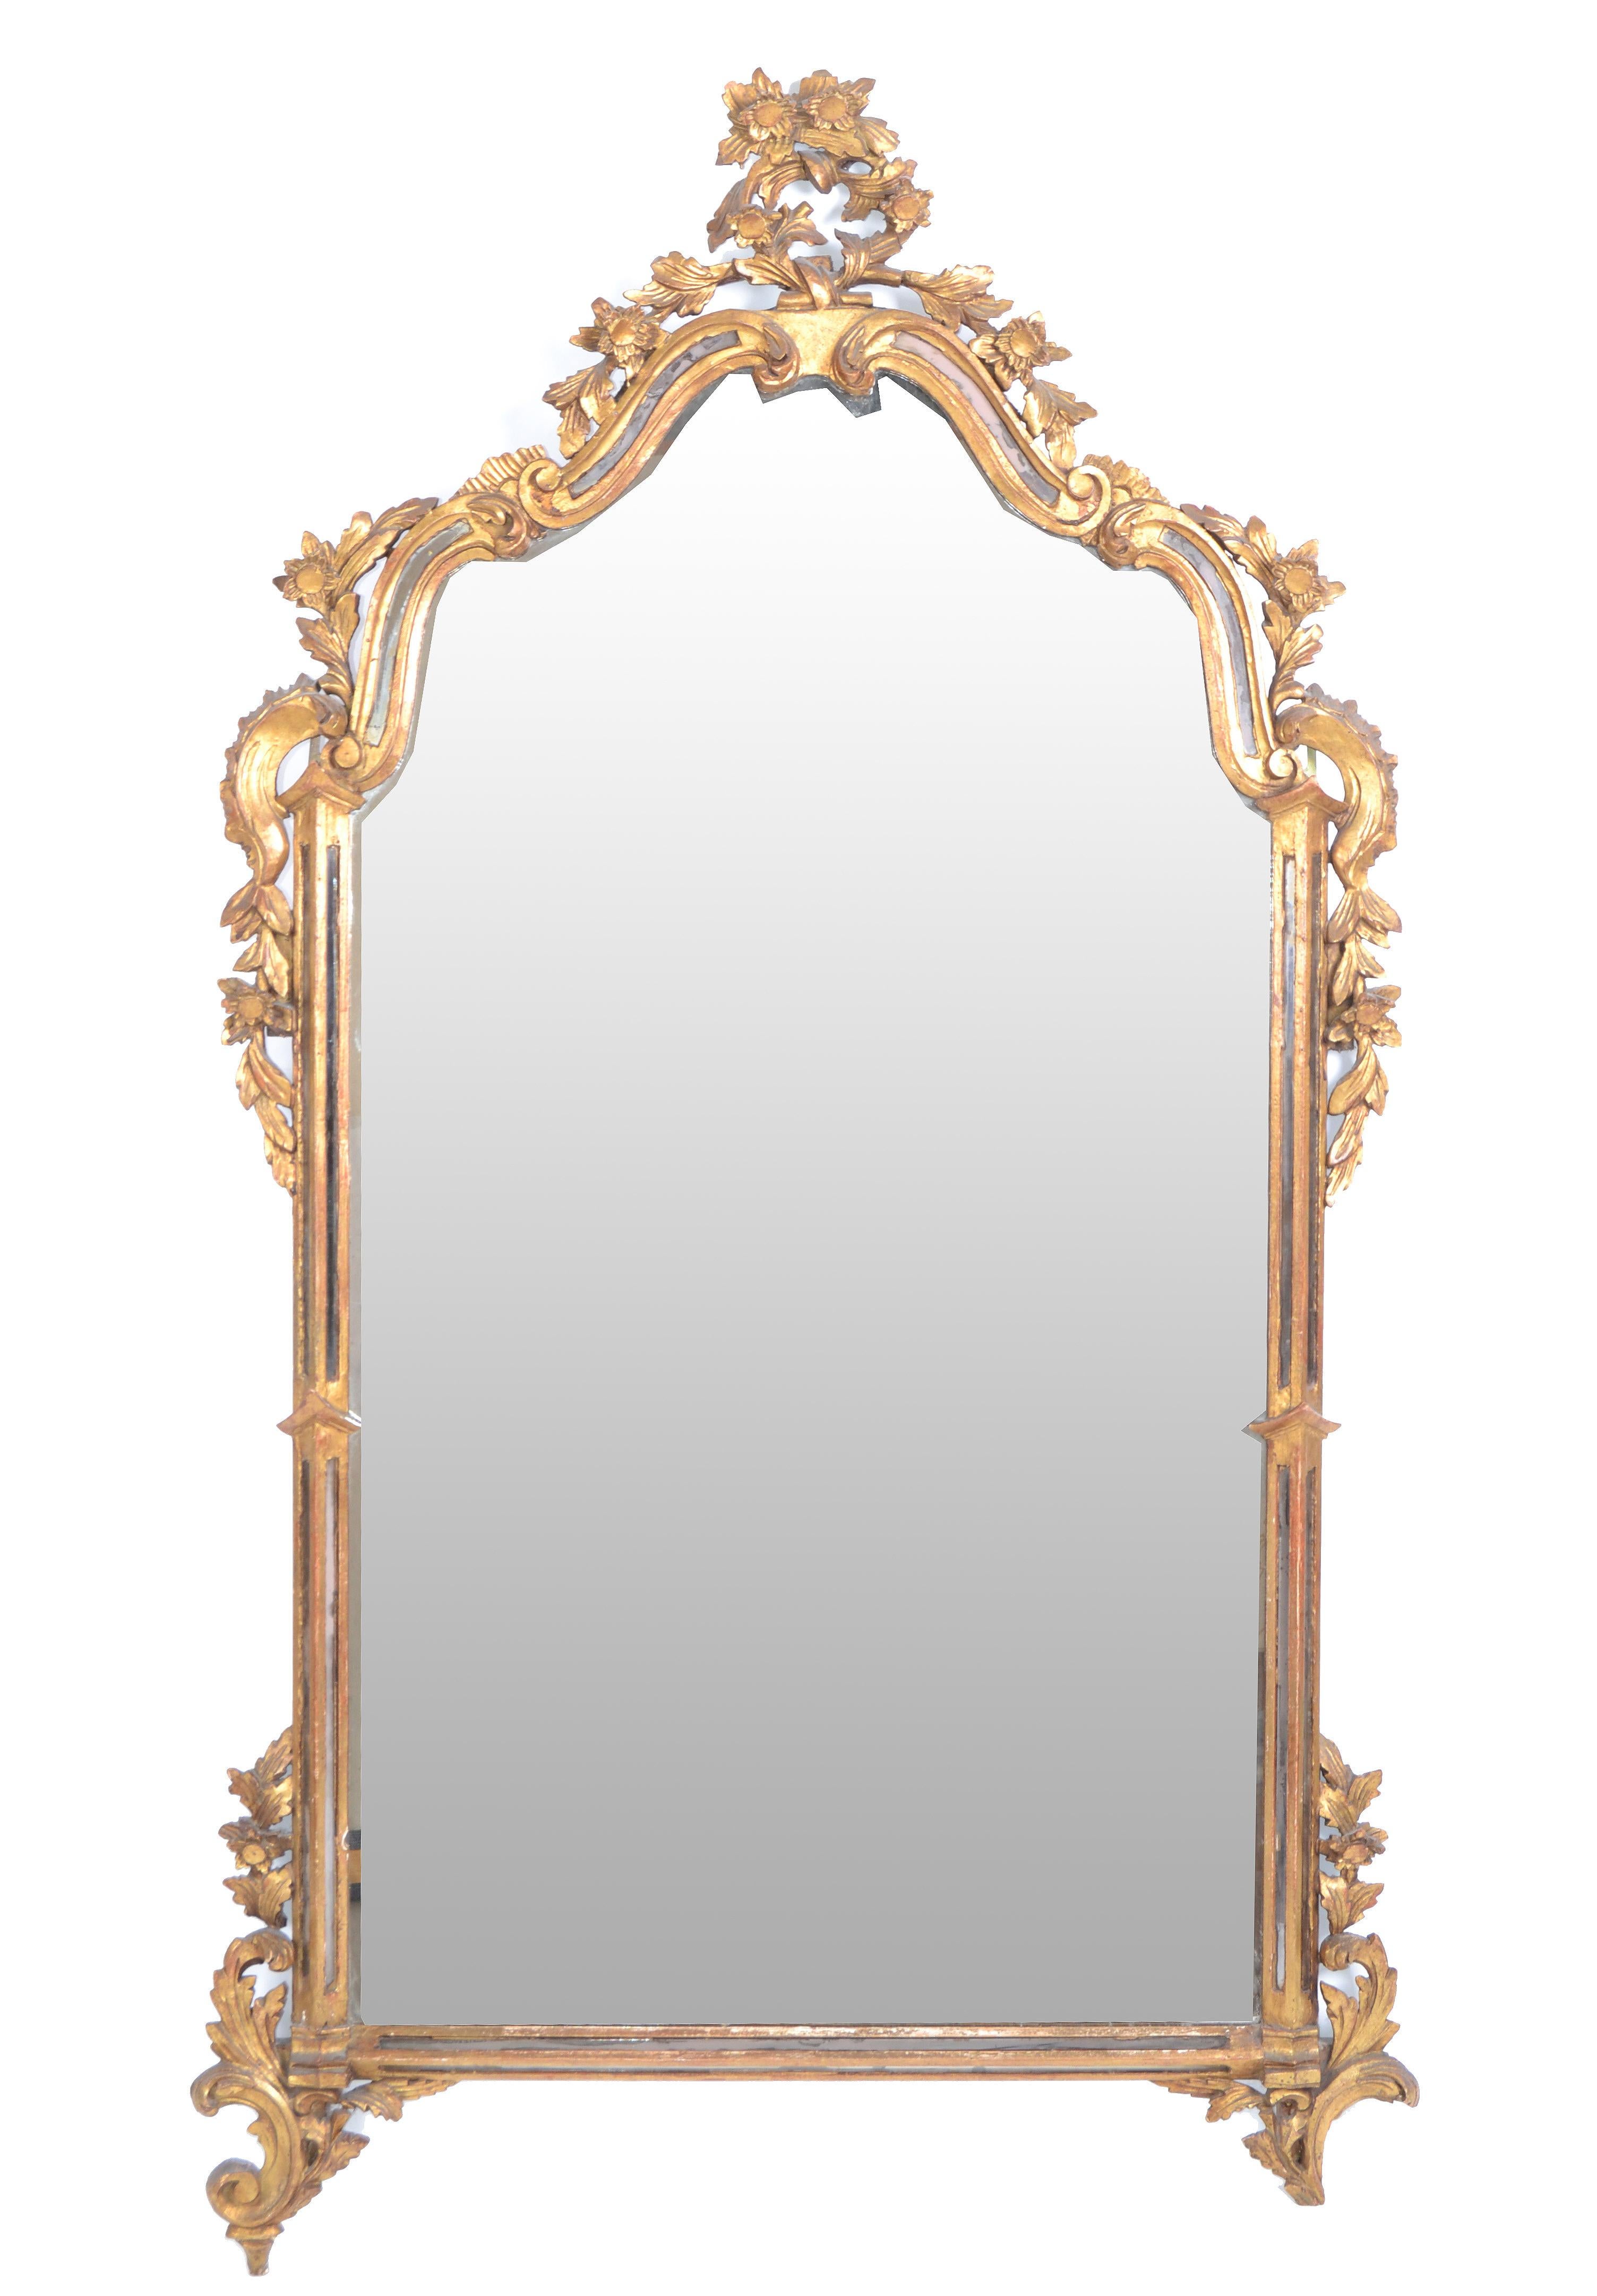 Hand carved Florentine giltwood and antique mirrored glass wall mirror, made in Italy.
The mirror is in original condition and shows foxing which adds character to the old treasure.
Wooden backing supports a secure way of hanging it.